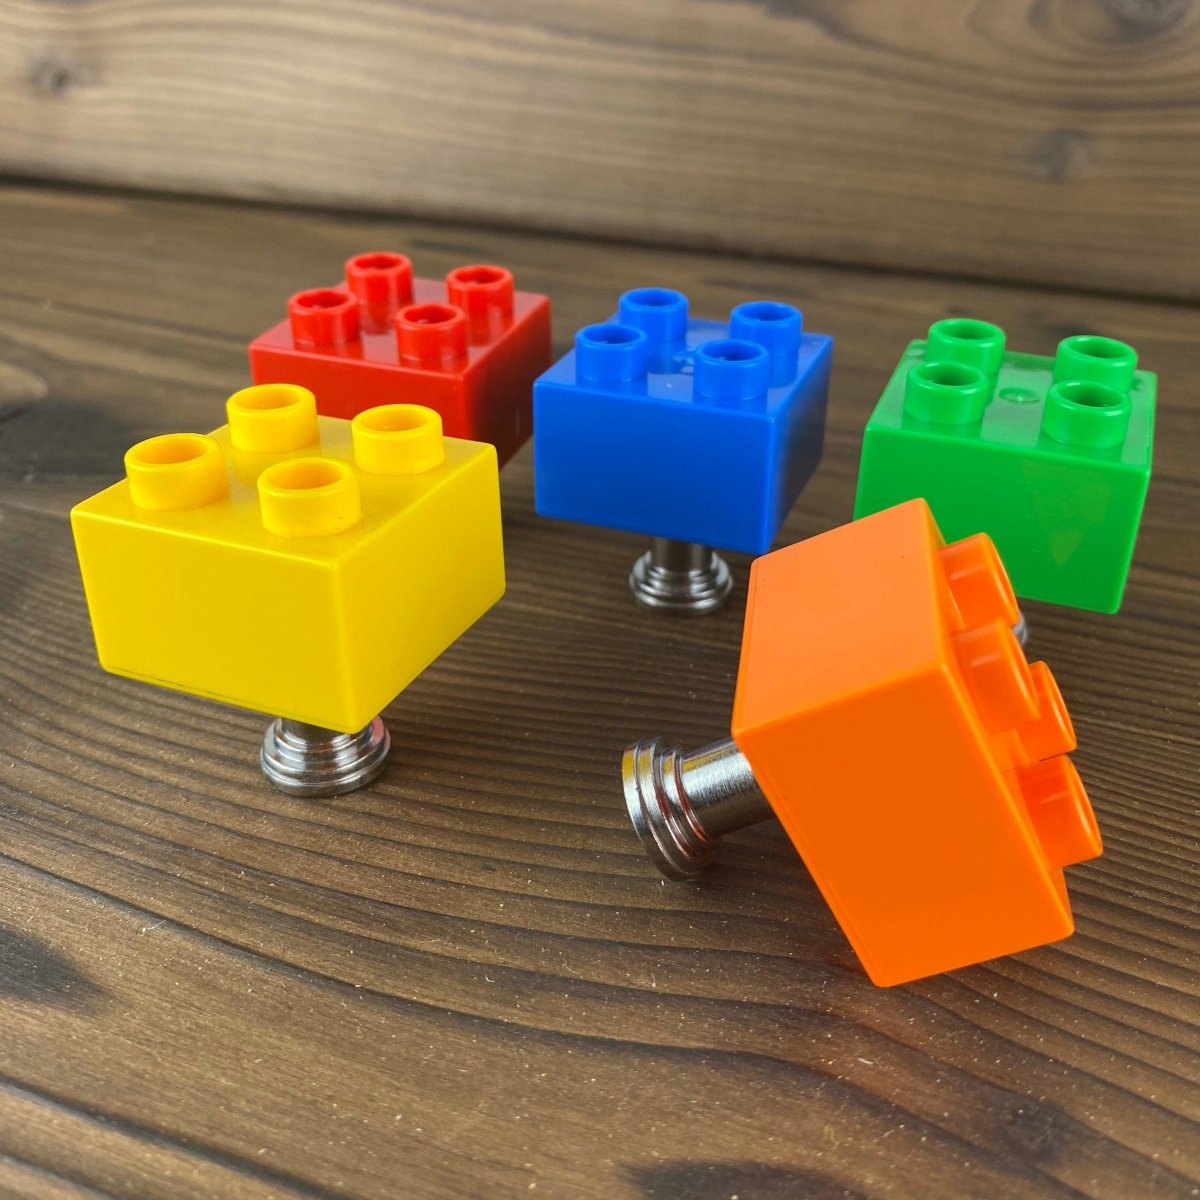 Drawer Pull Made of Lego 